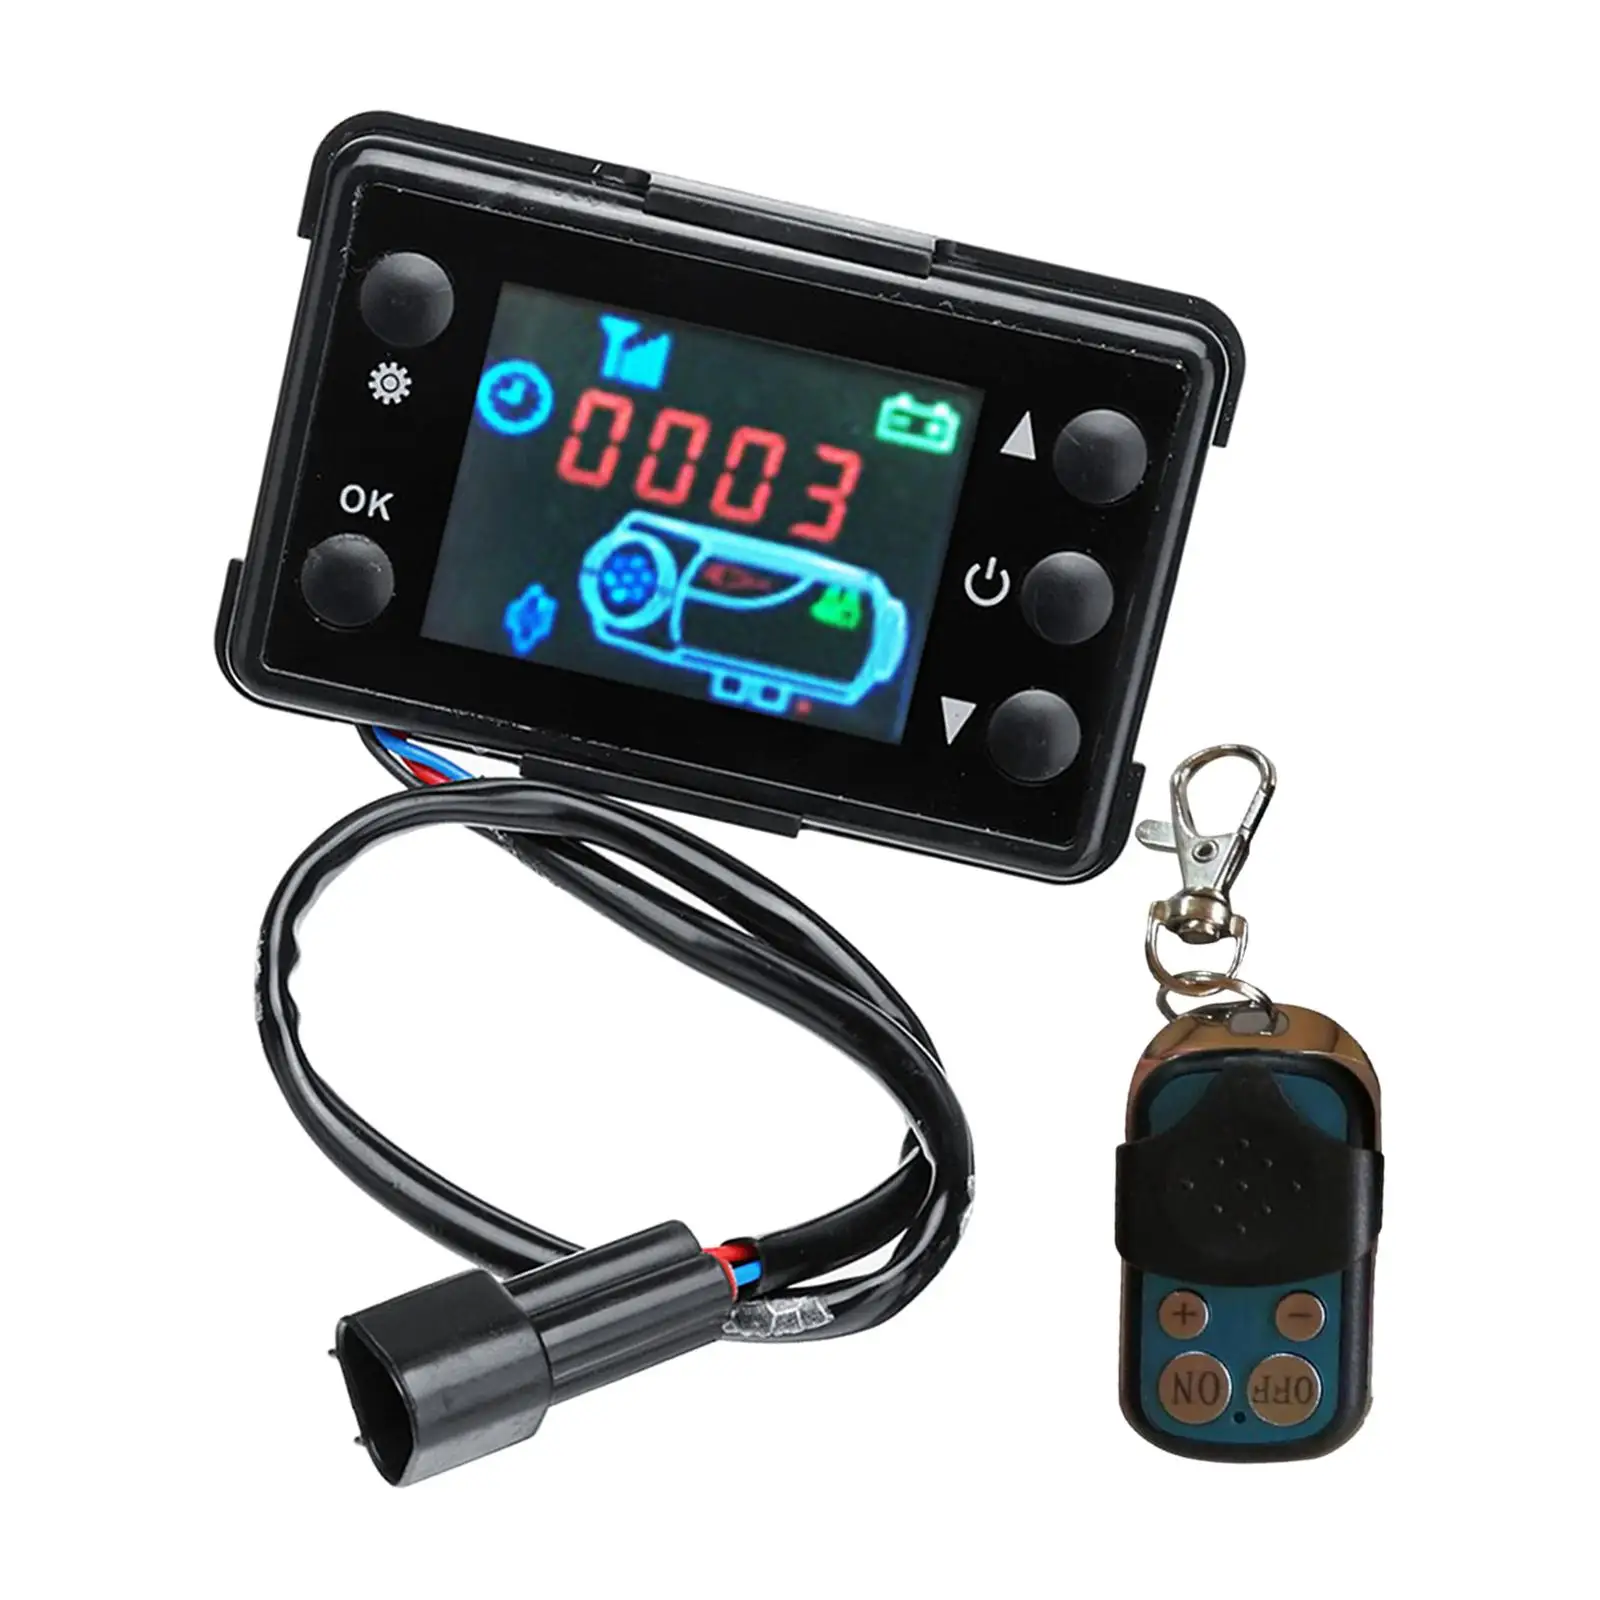 LCD Monitor Switch Parking Heater Control 12/24V for Vehicles Truck Car